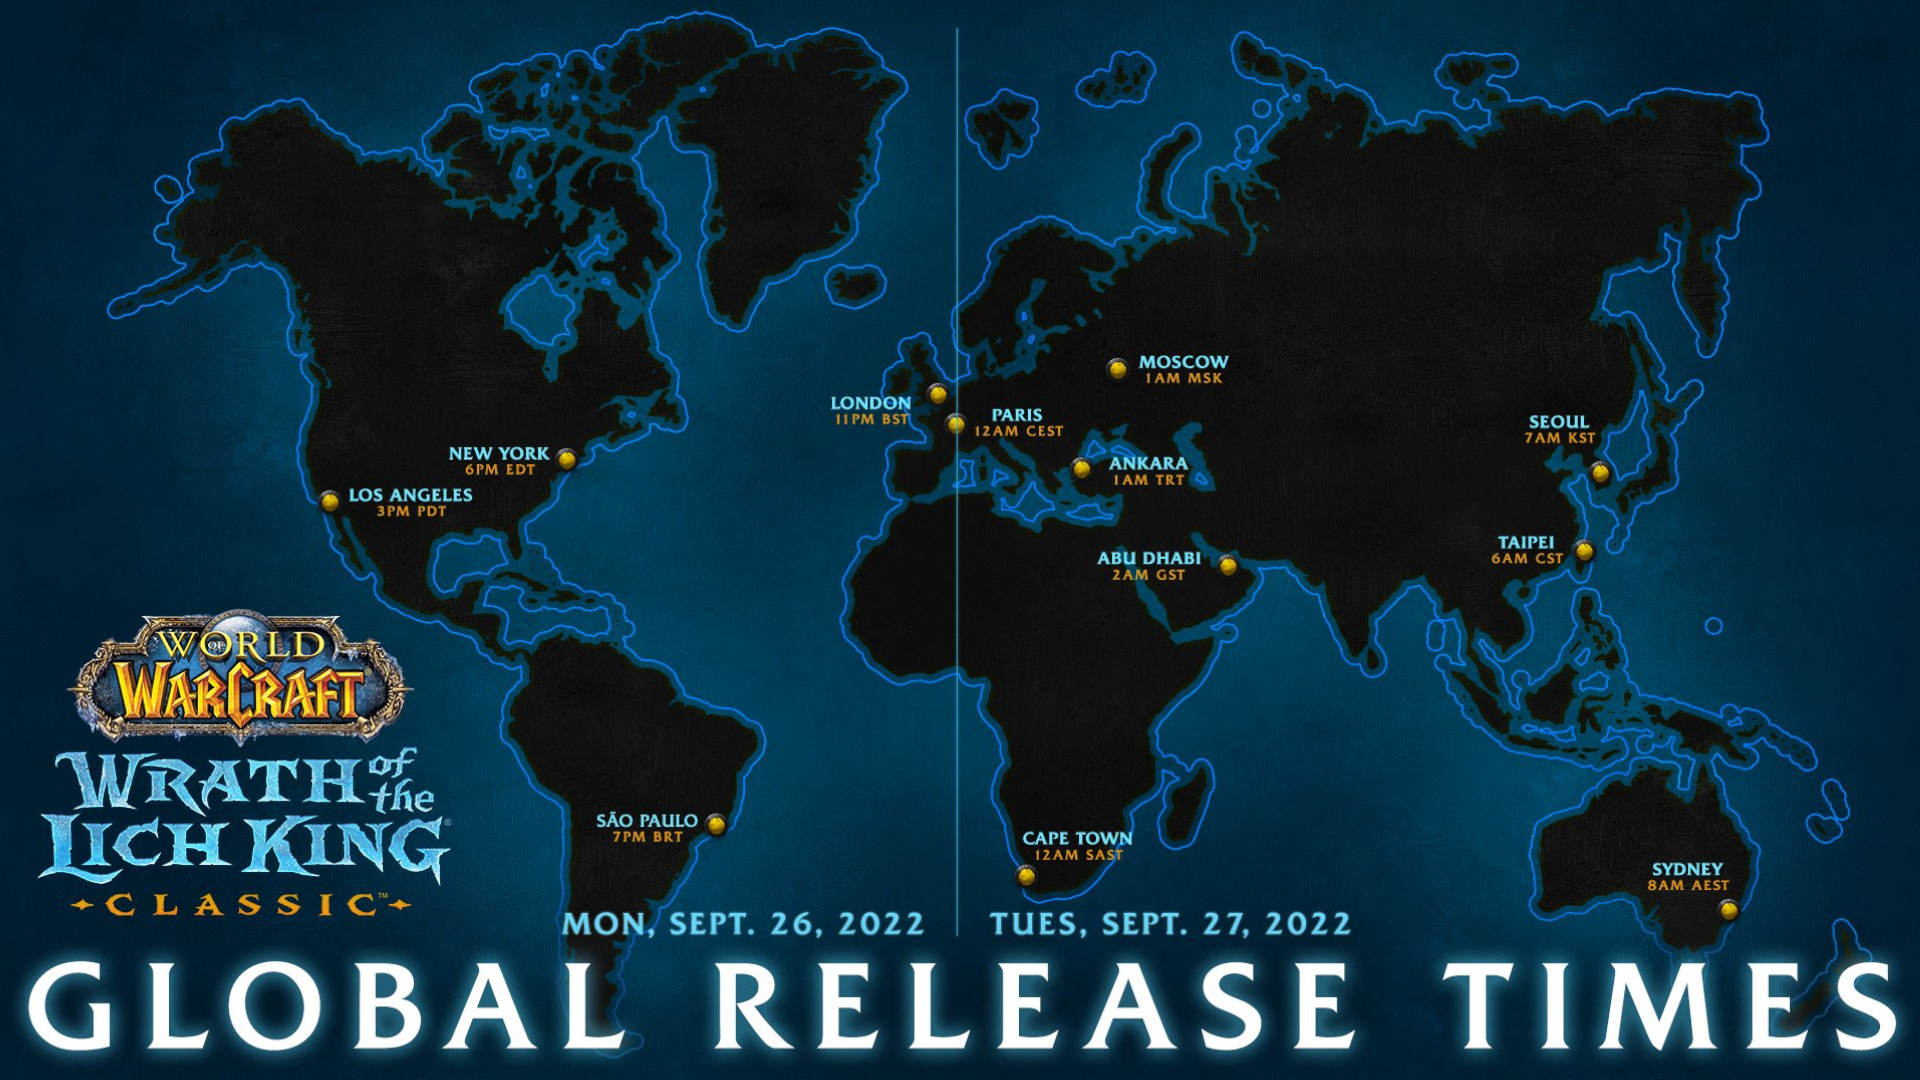 WotLK release time